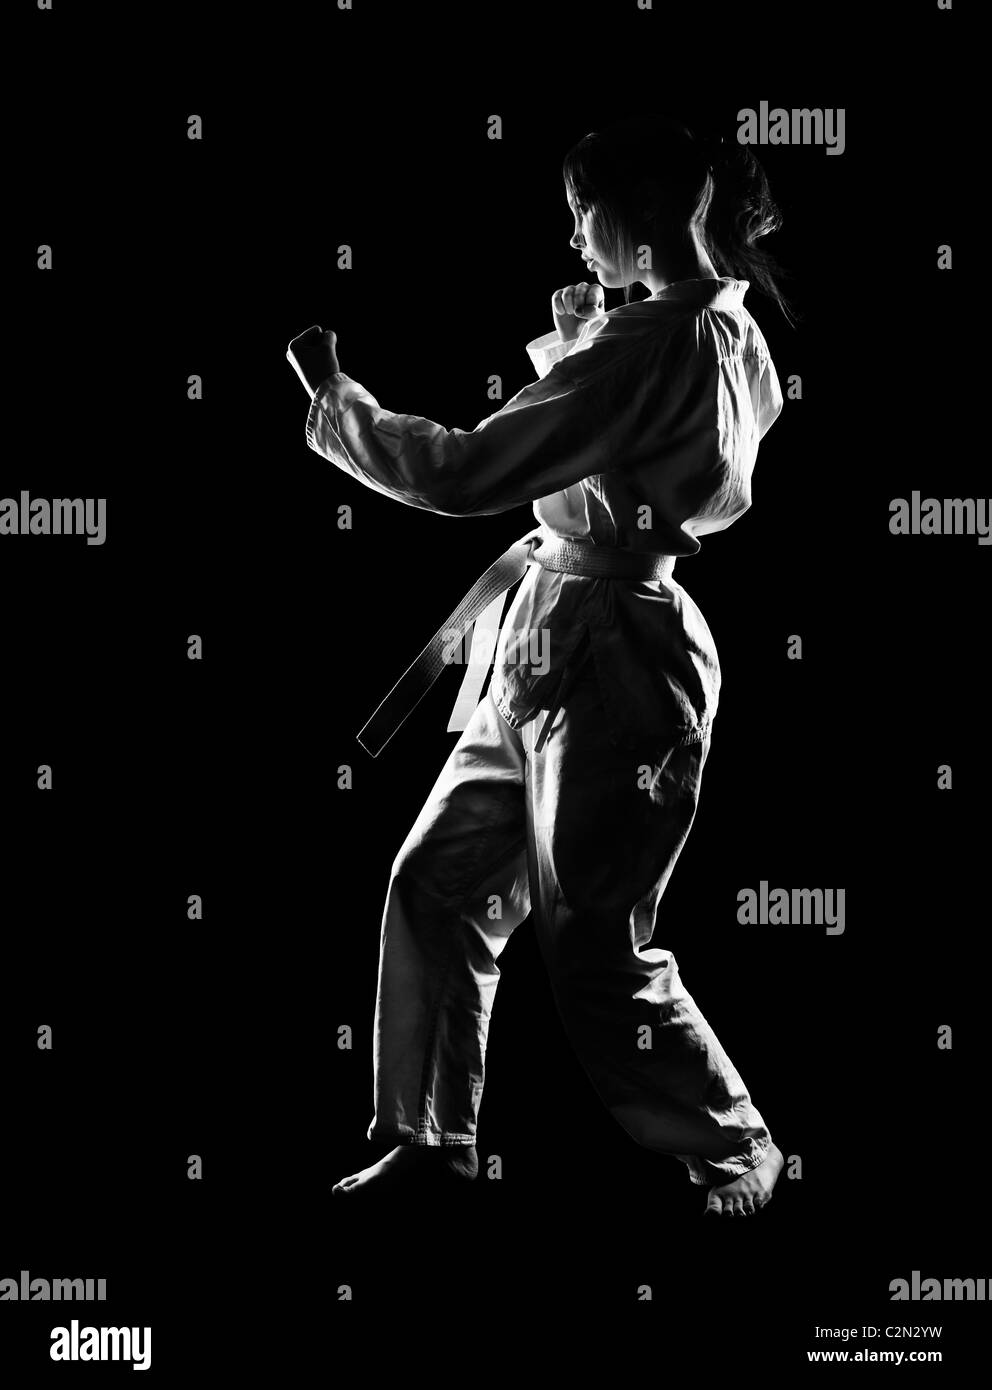 Woman in karate pose Black and White Stock Photos & Images - Alamy